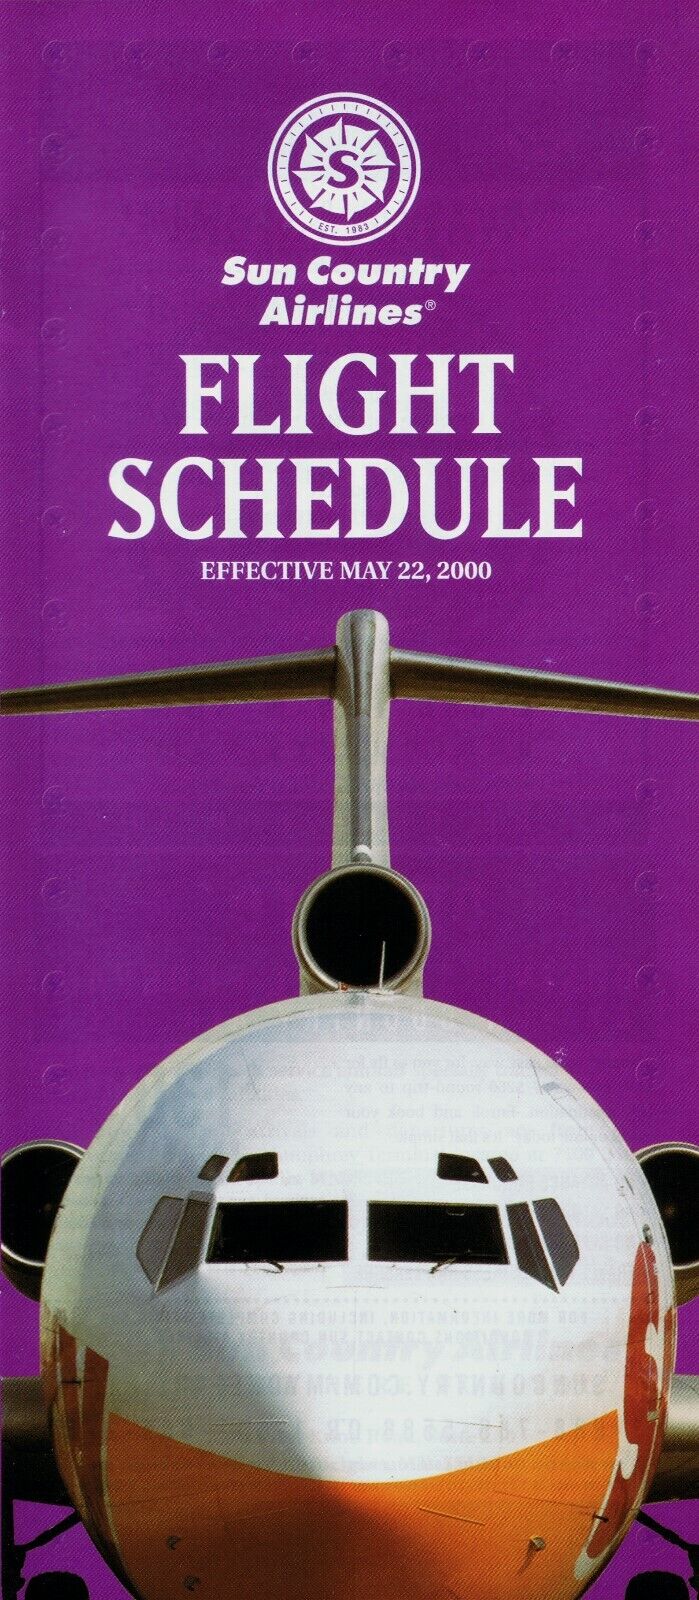 Sun Country Airlines Timetable  May 22, 2000 =